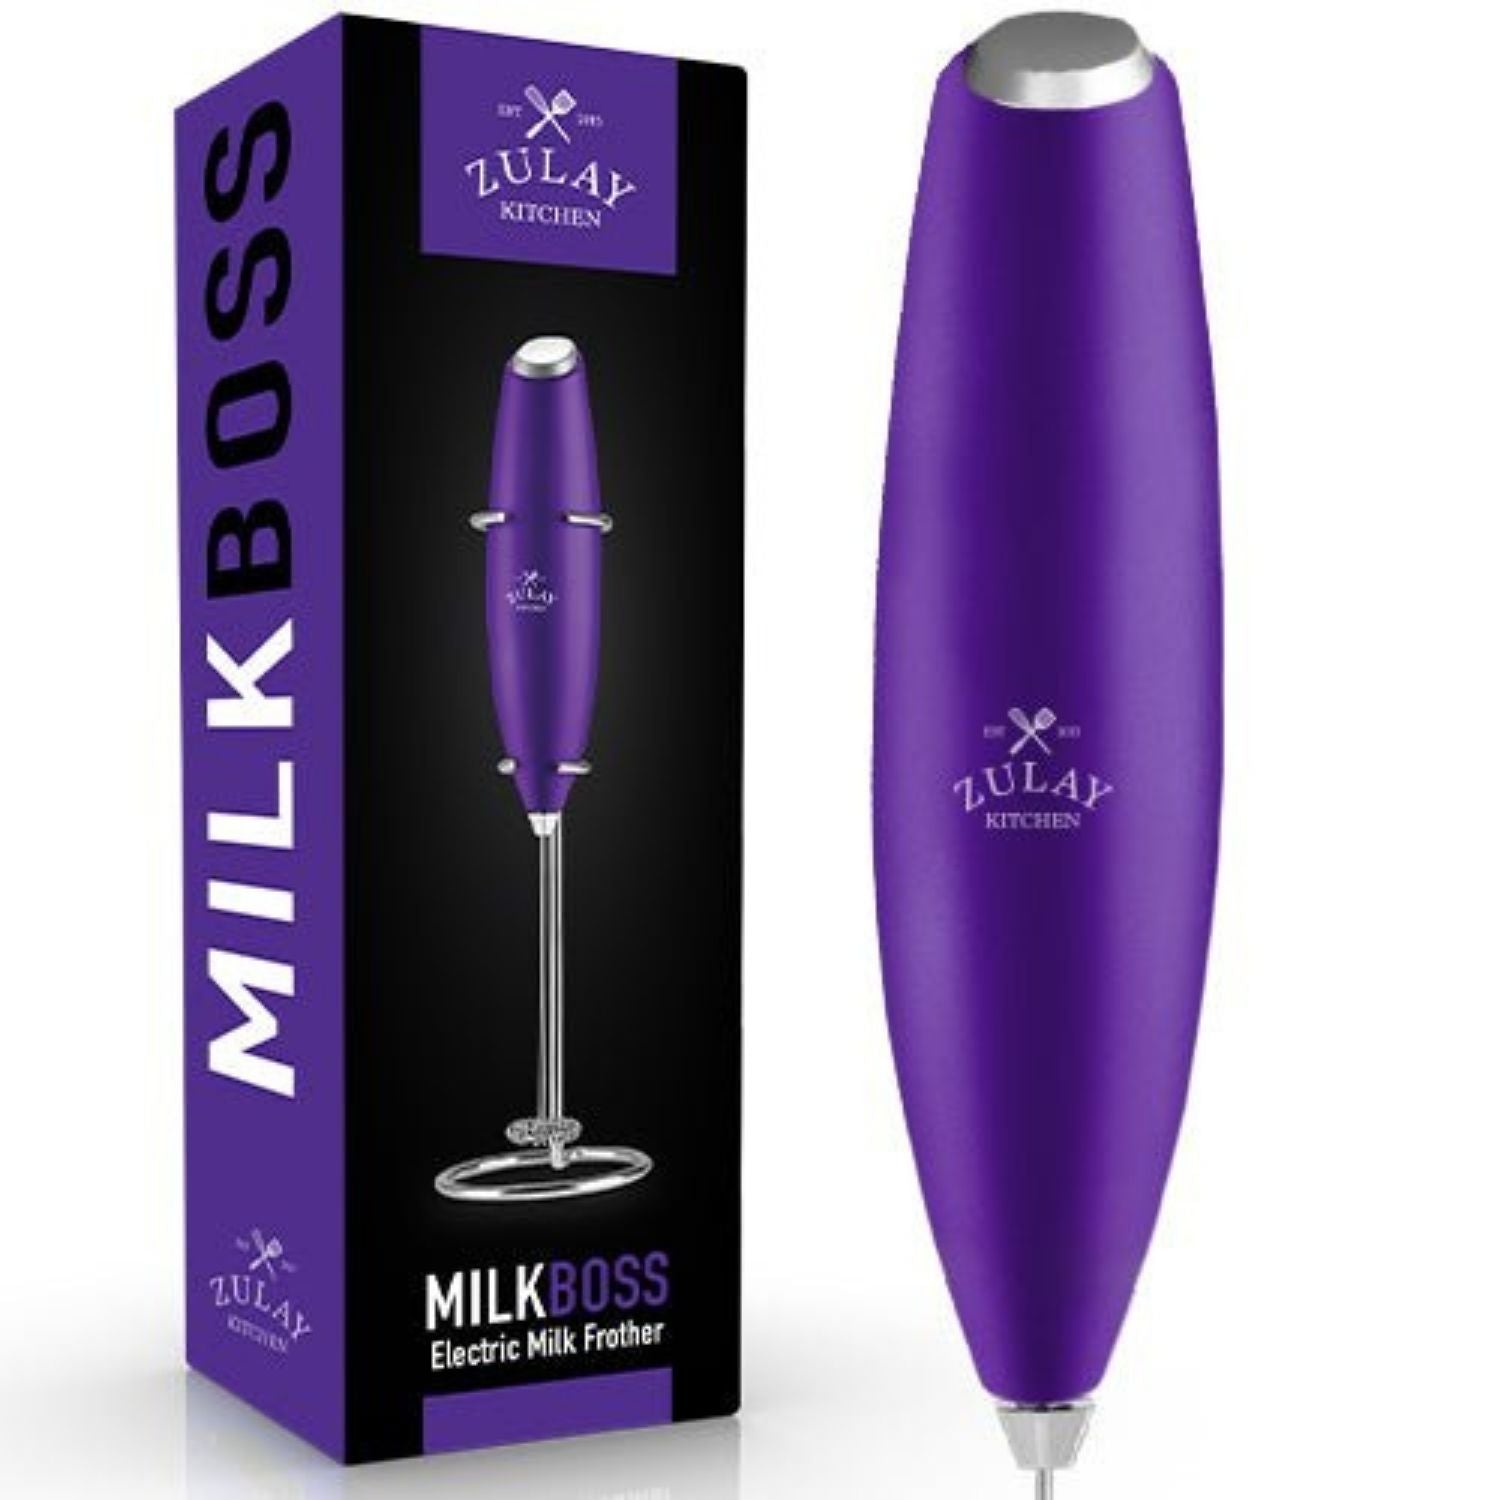 Zulay Kitchen MILK BOSS Milk Frother With Stand - Northern Lights  (Purple/Teal), 1 - Gerbes Super Markets